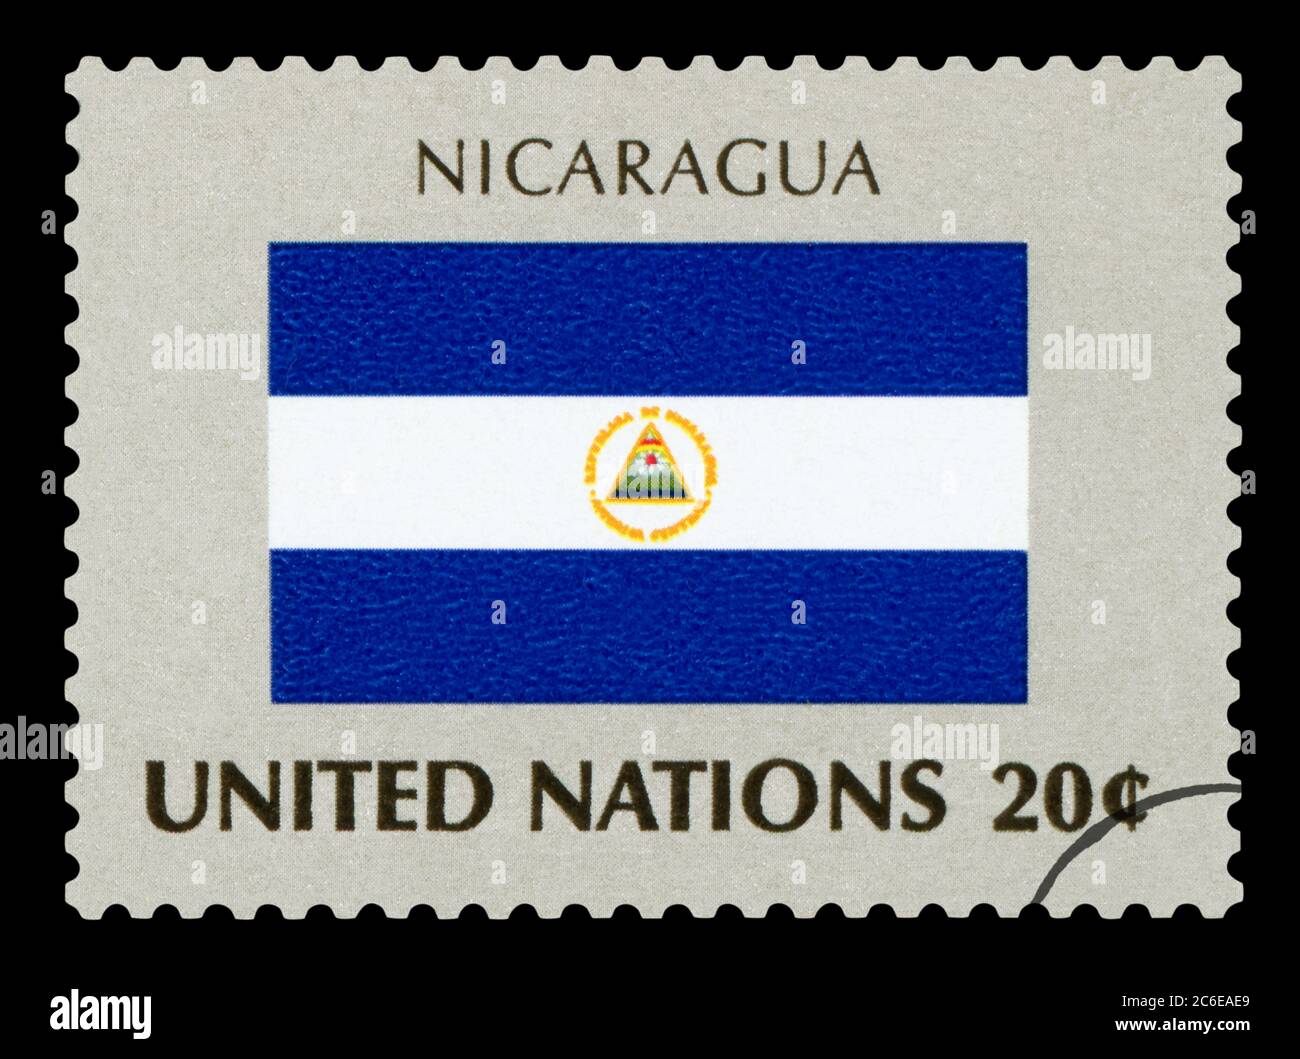 NICARAGUA - Postage Stamp of Nicaragua national flag, Series of United Nations, circa 1984. Isolated on black background. Stock Photo